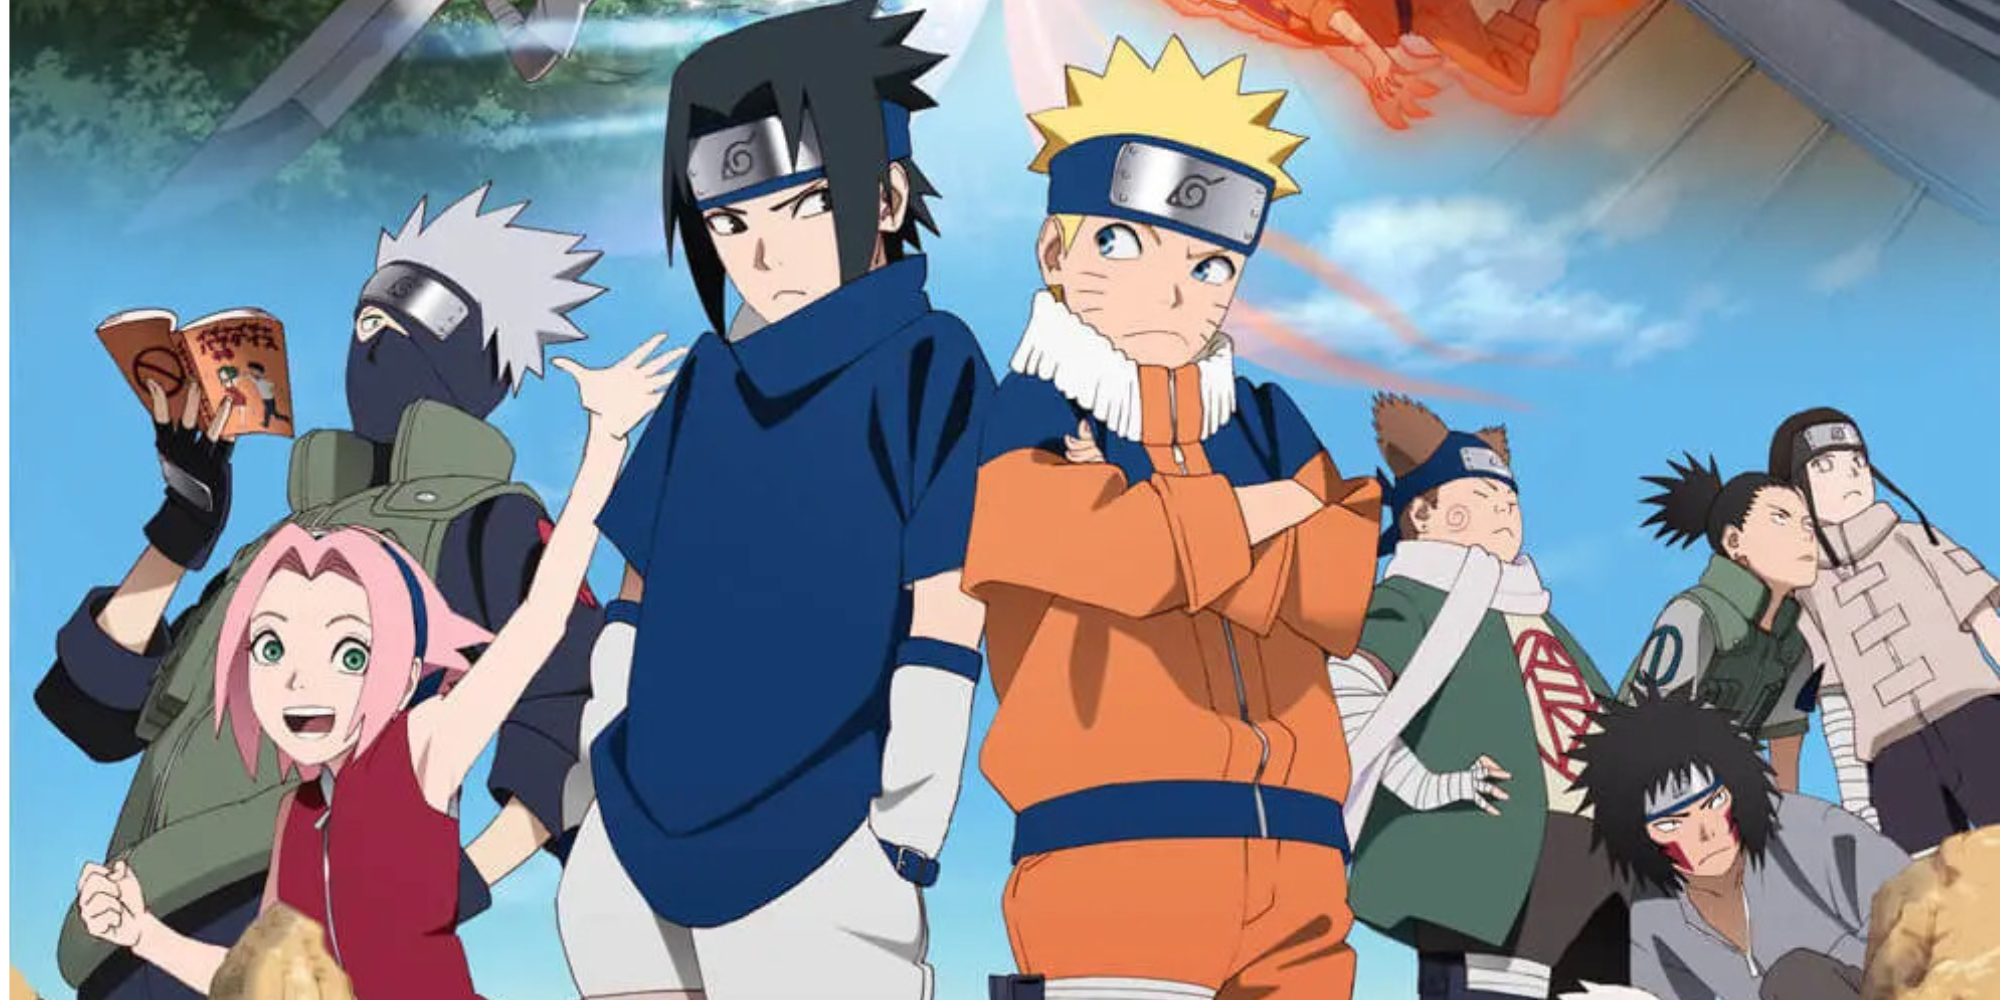 Naruto Gets 20th Anniversary PV With Reanimated Scenes